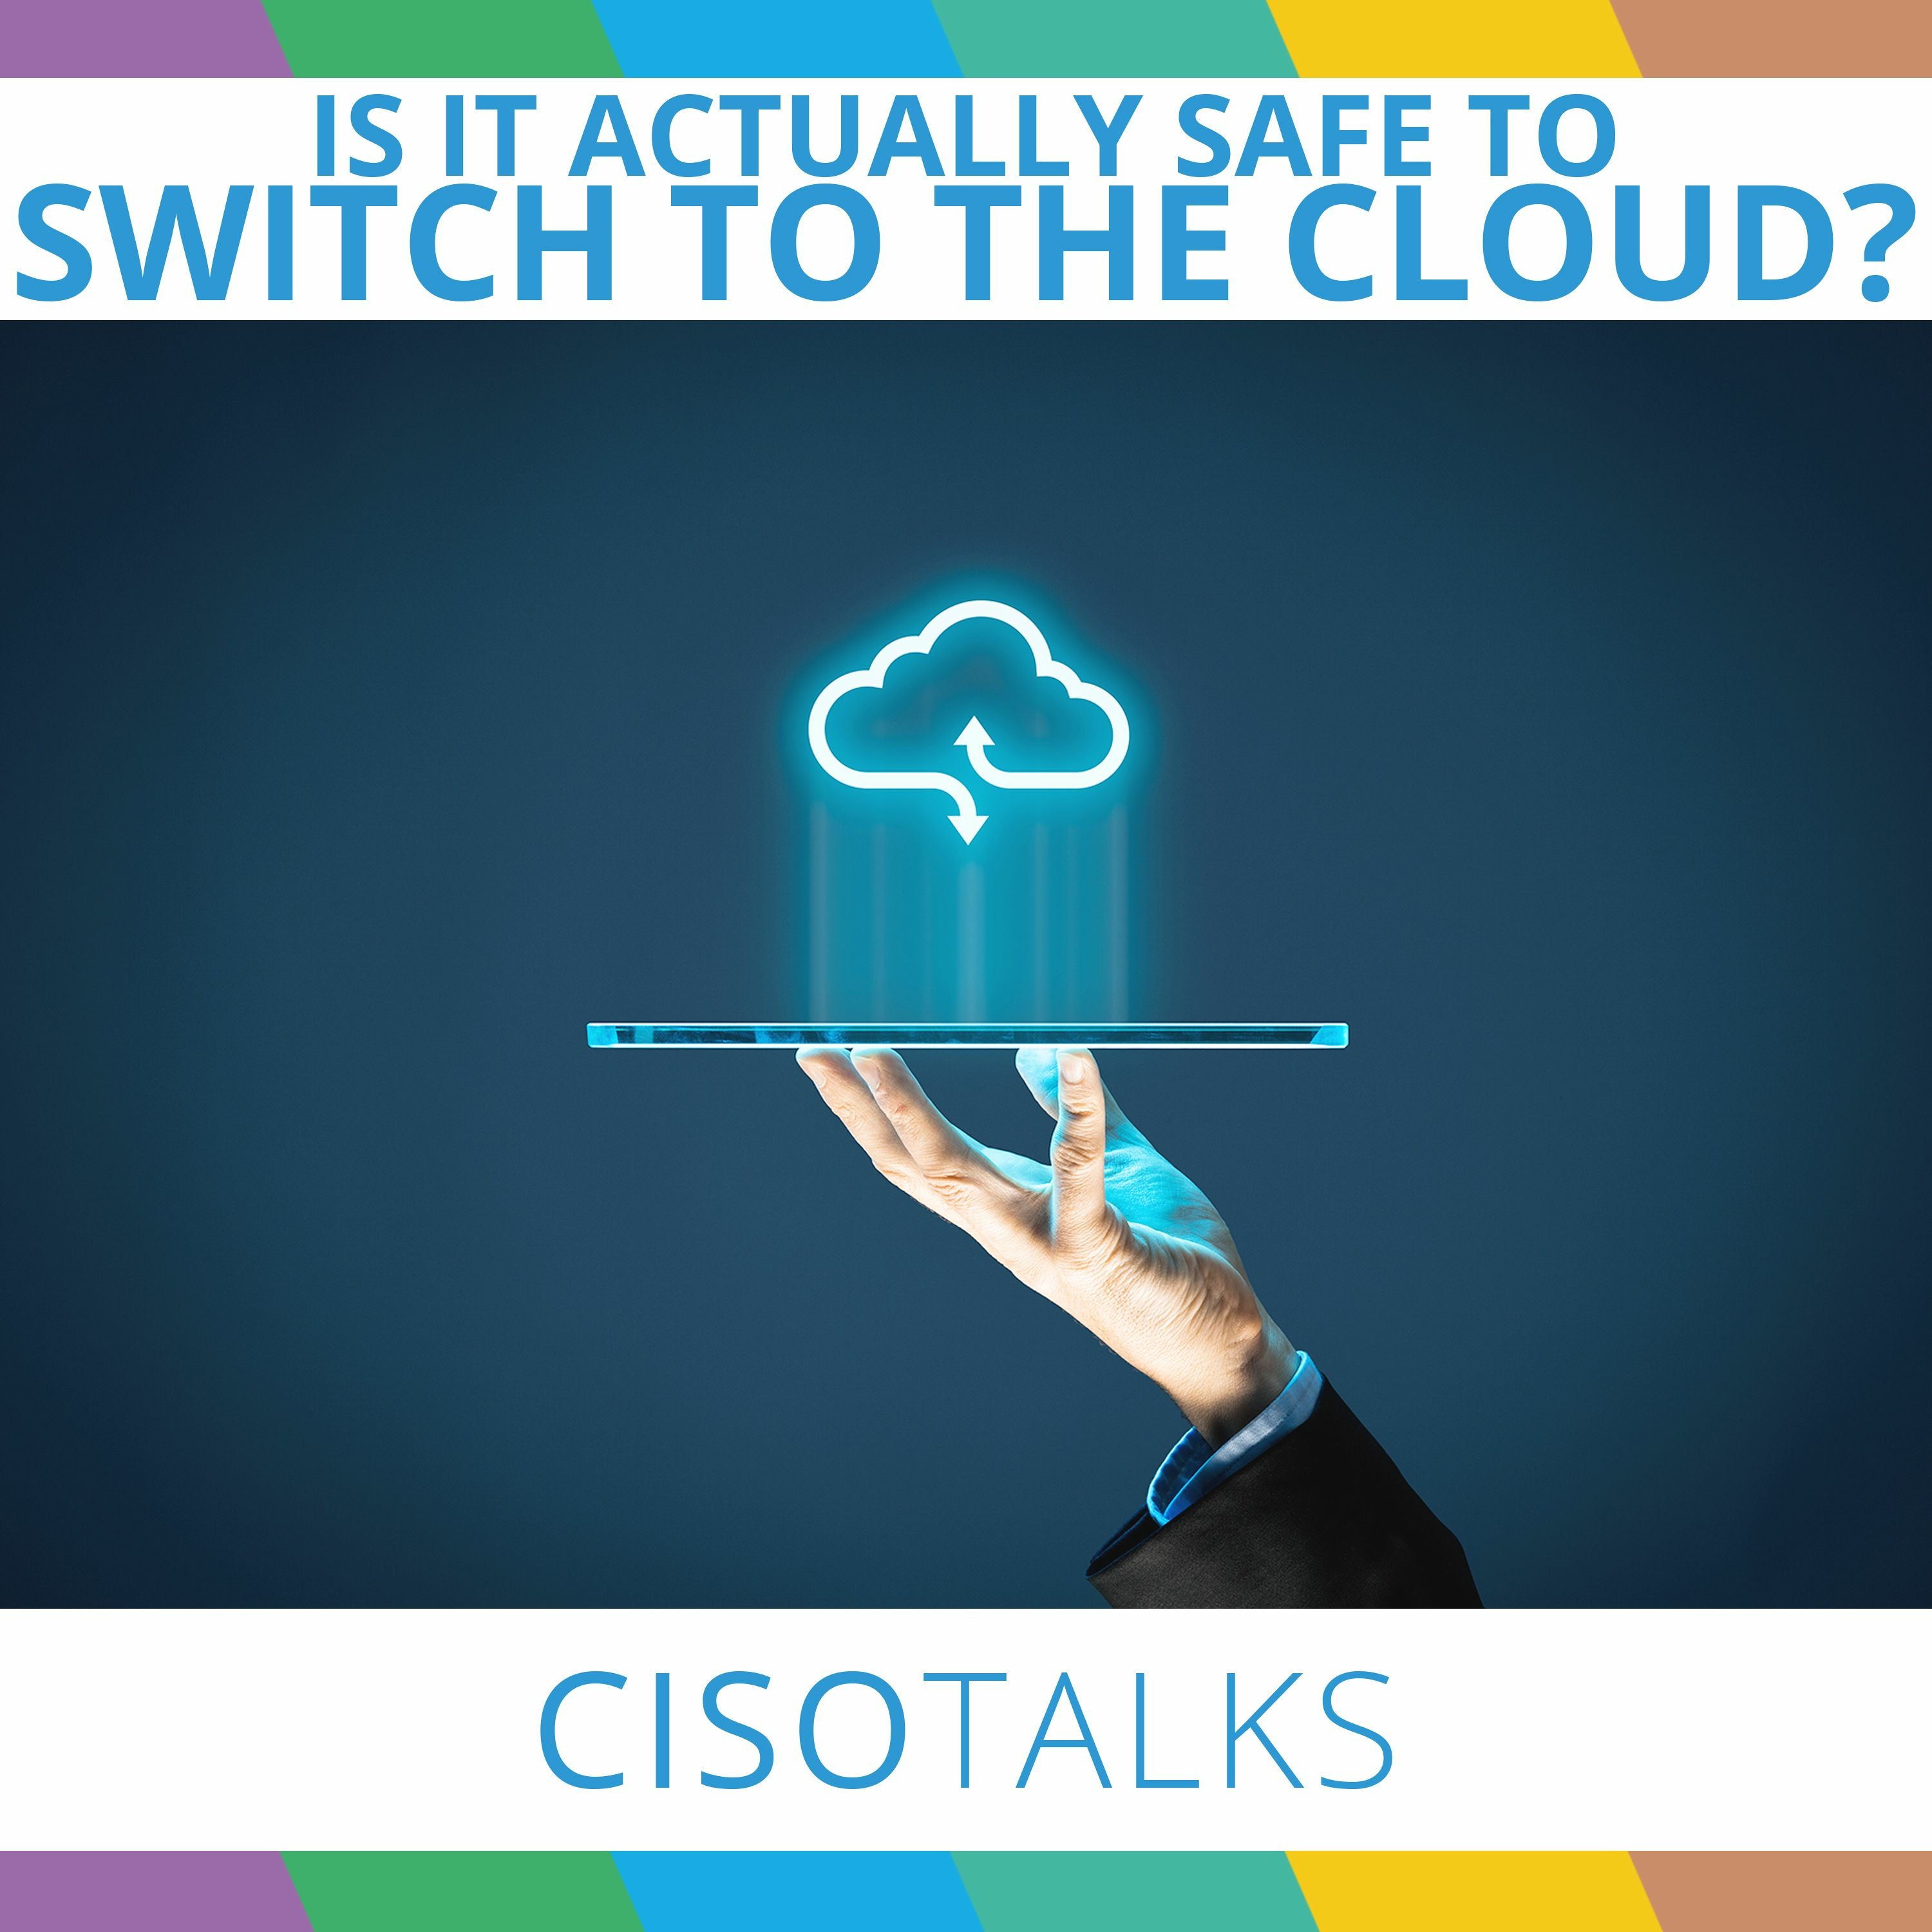 Is It Actually Safe To Switch To The Cloud? | Has GDPR Impacted Our Safety? | CISO Talks